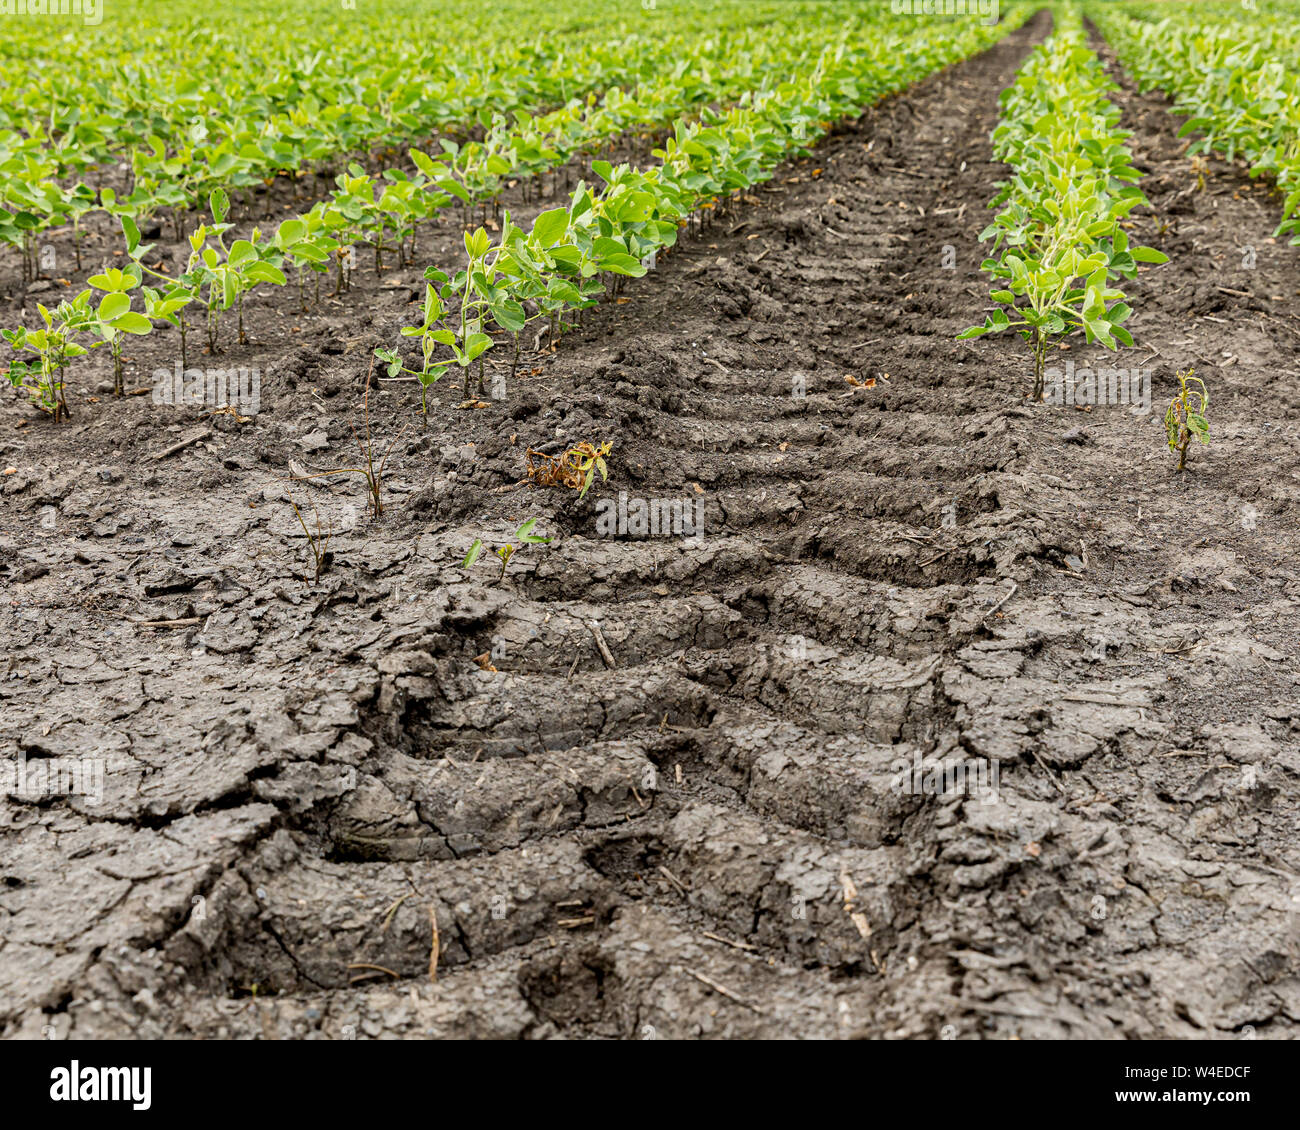 Tractor tire tread tracks, marks between rows of a soybean farm field Stock Photo